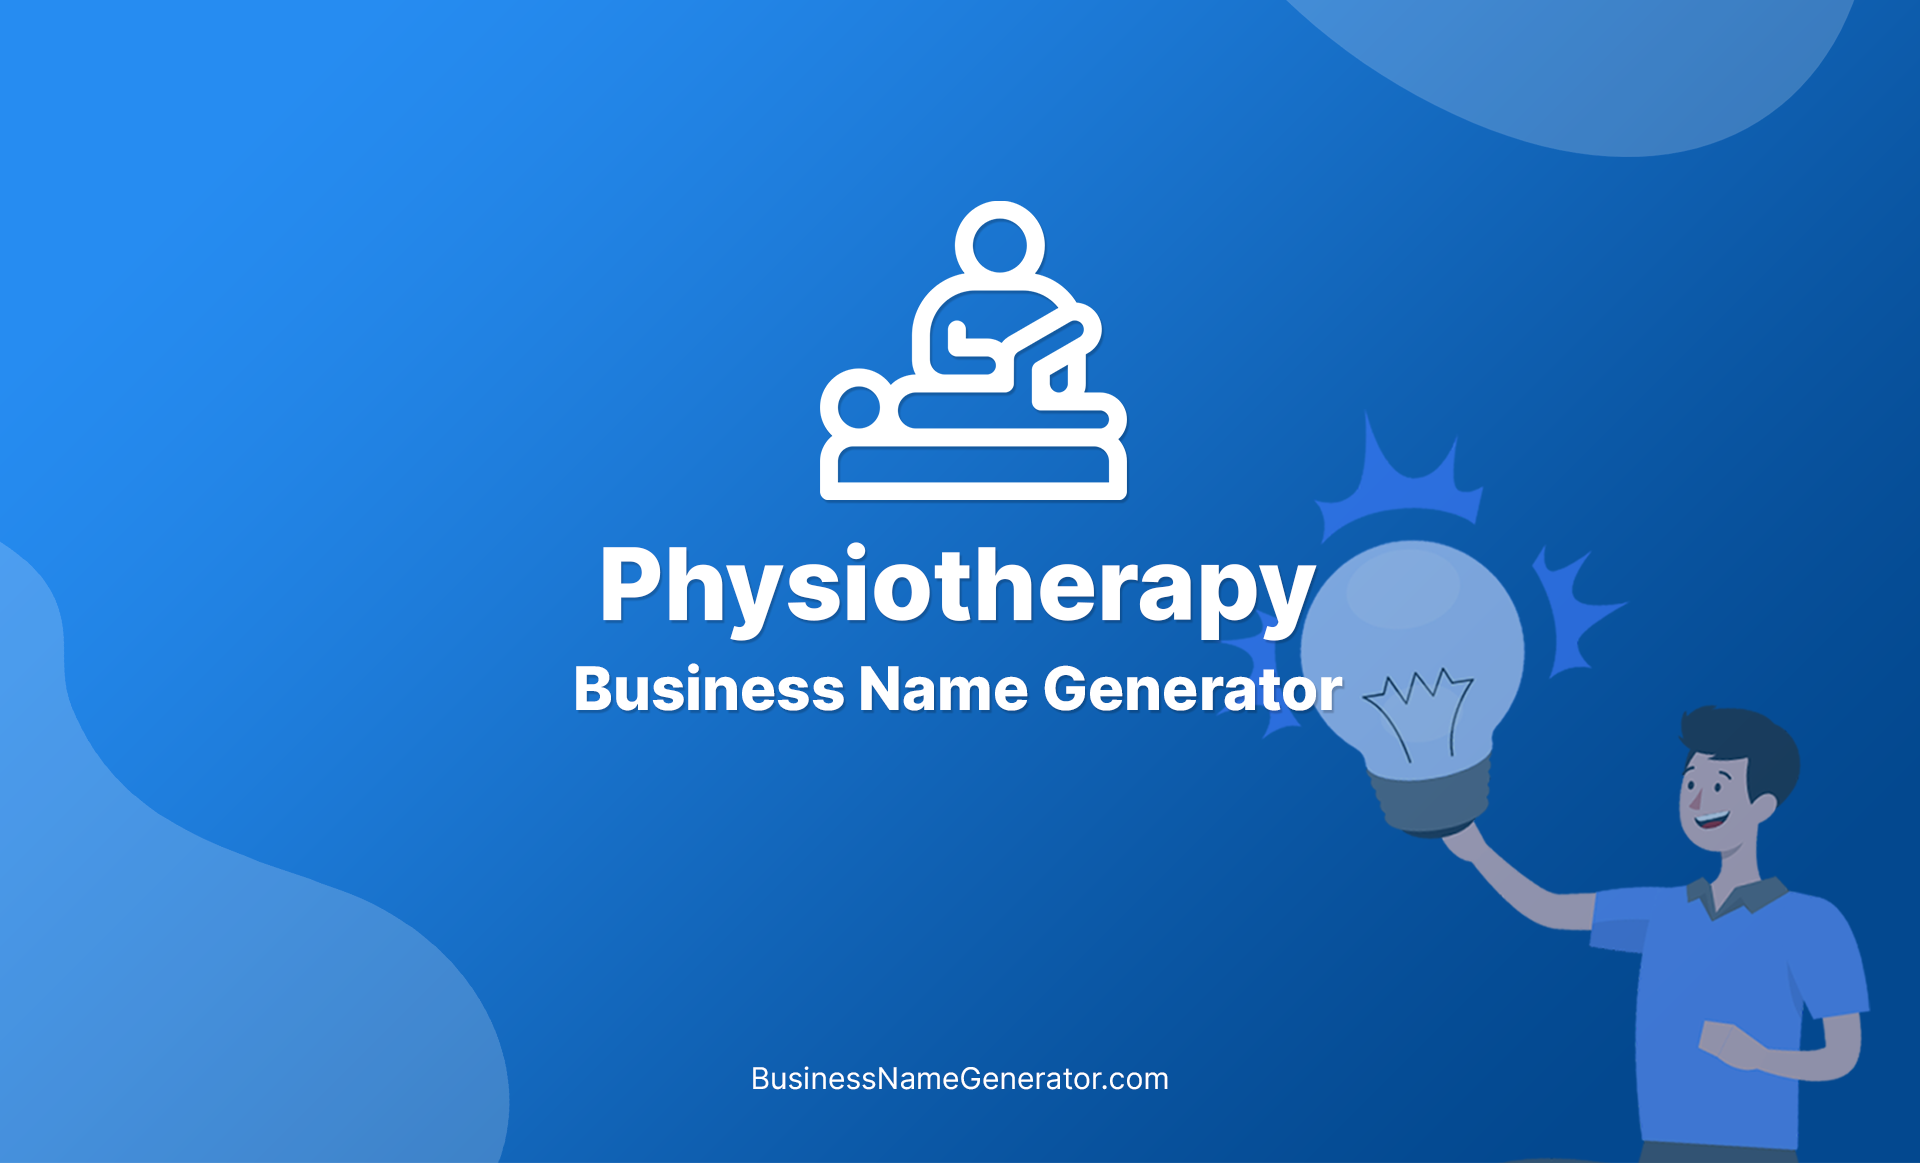 Physiotherapy Business Name Generator